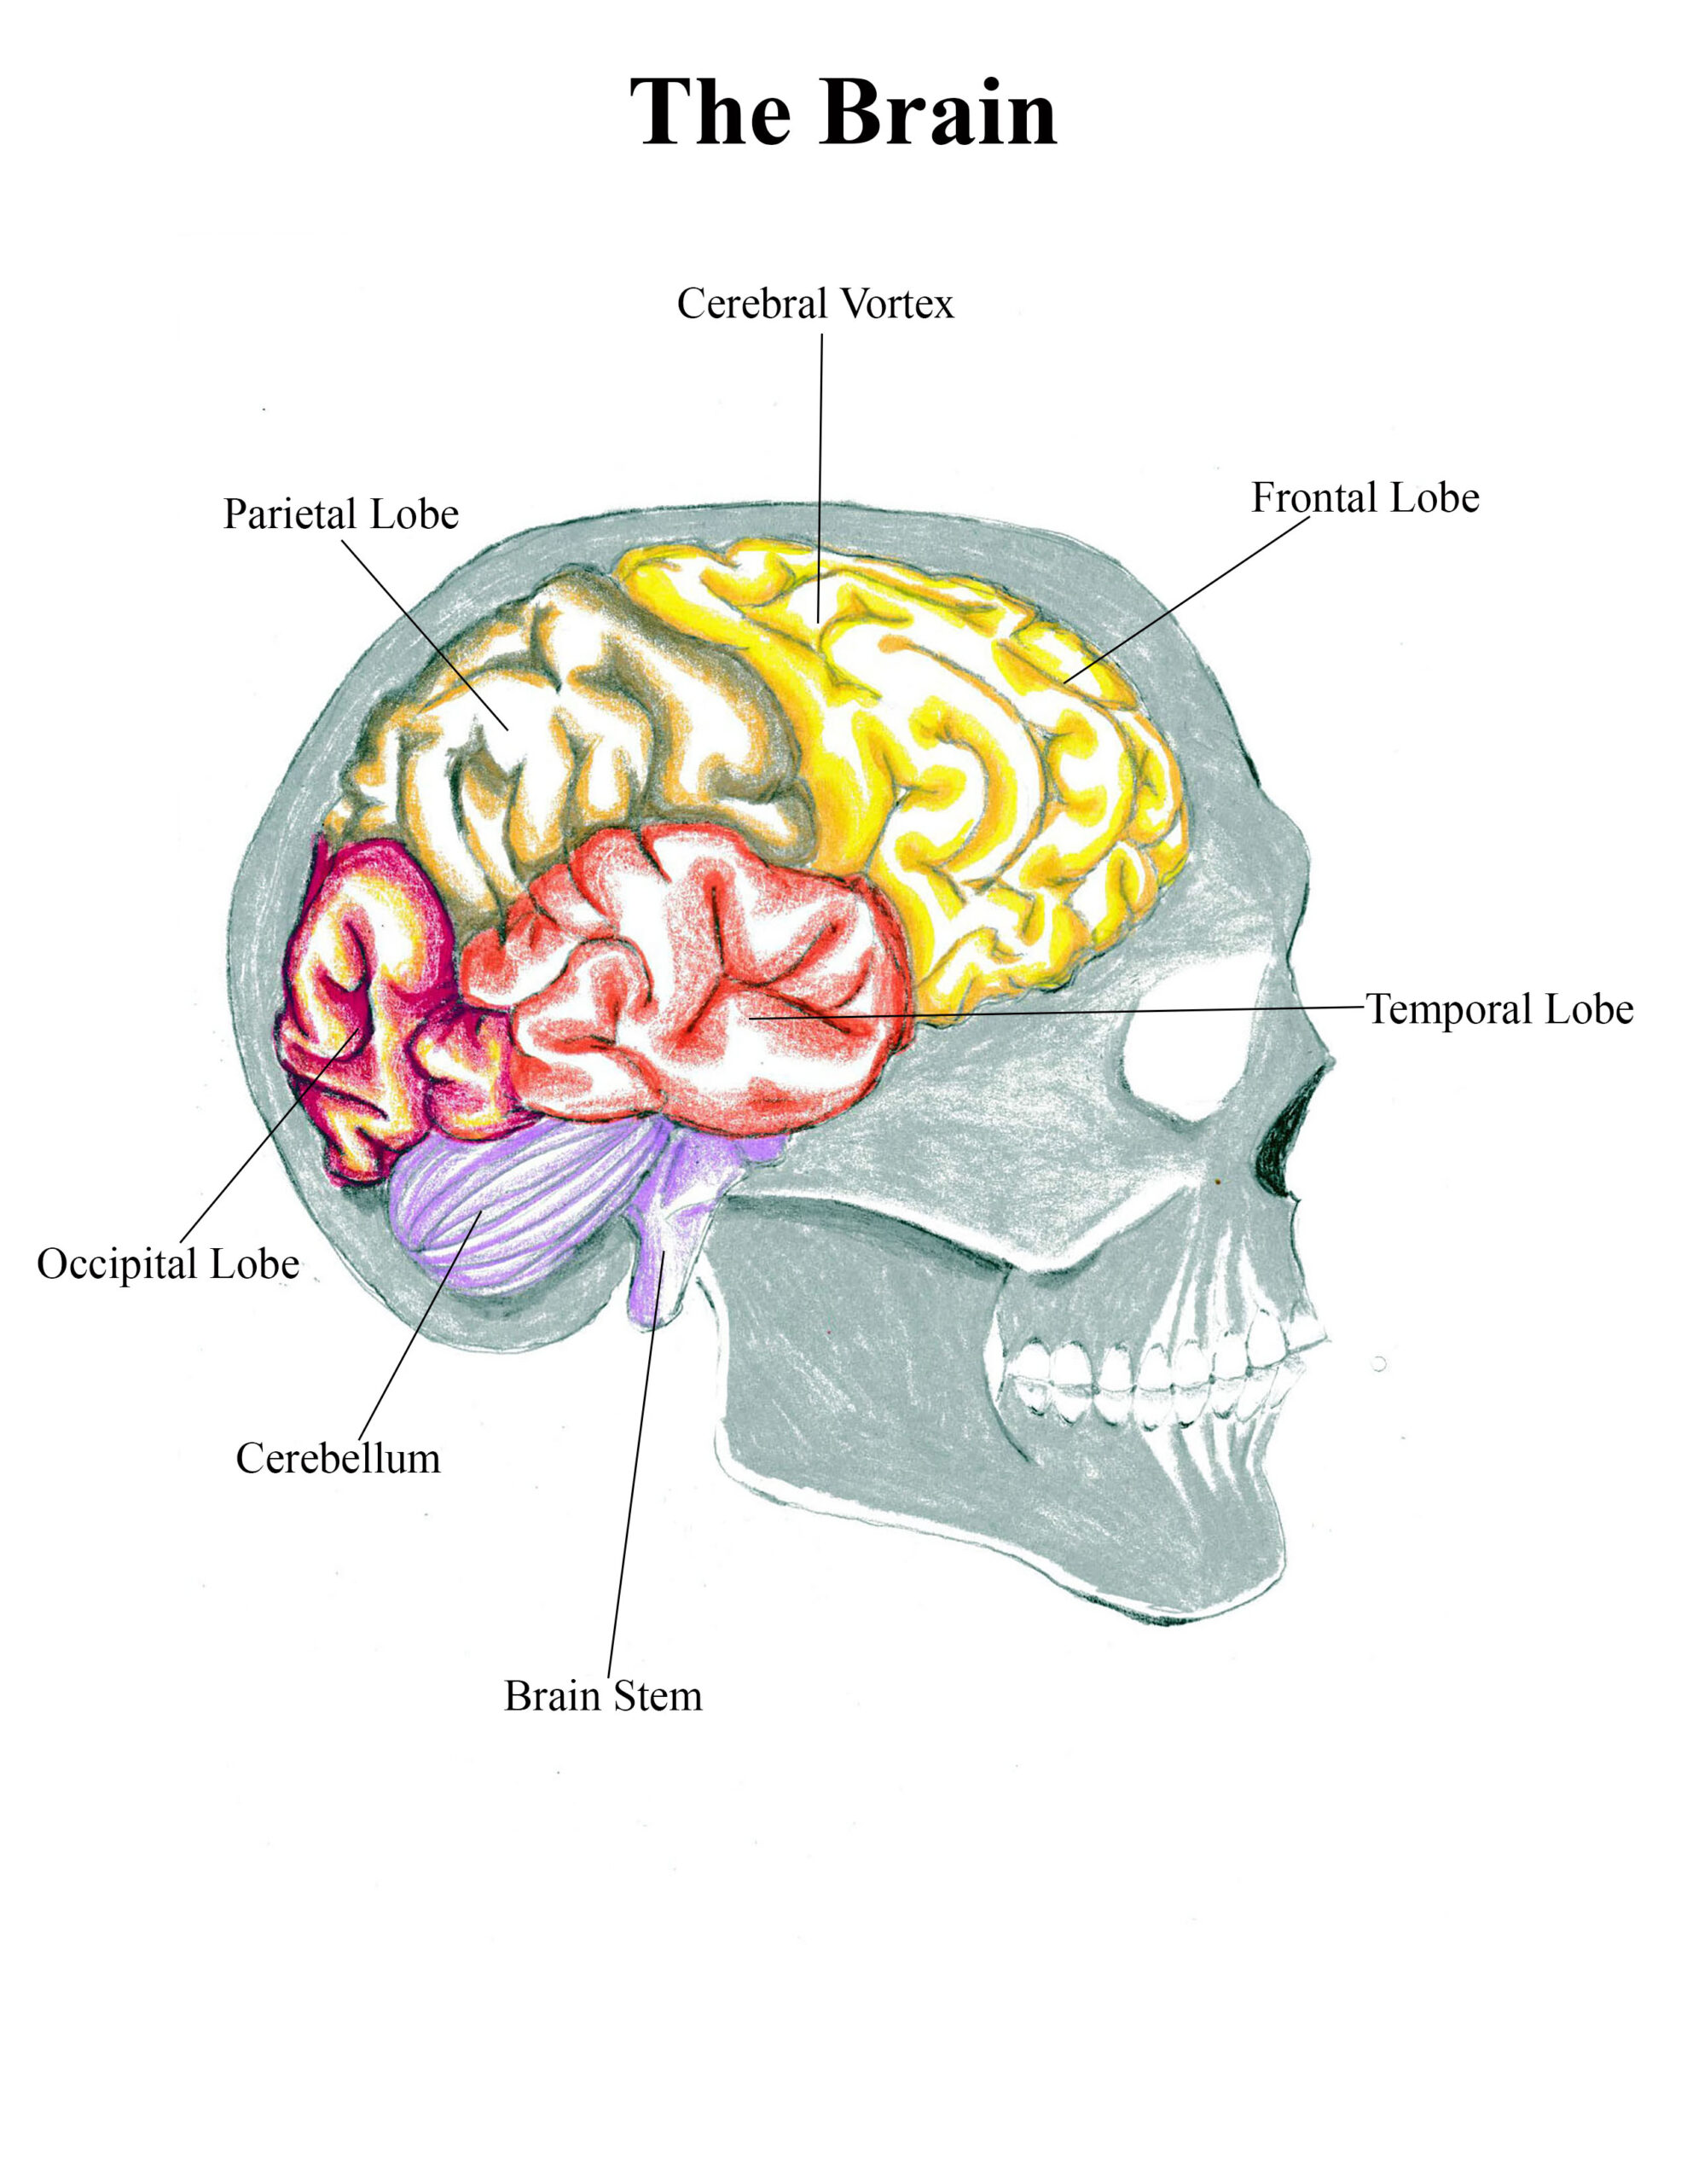 Human Brain Diagram Labeled With Functions | Brain anatomy and function,  Human brain diagram, Basic anatomy and physiology